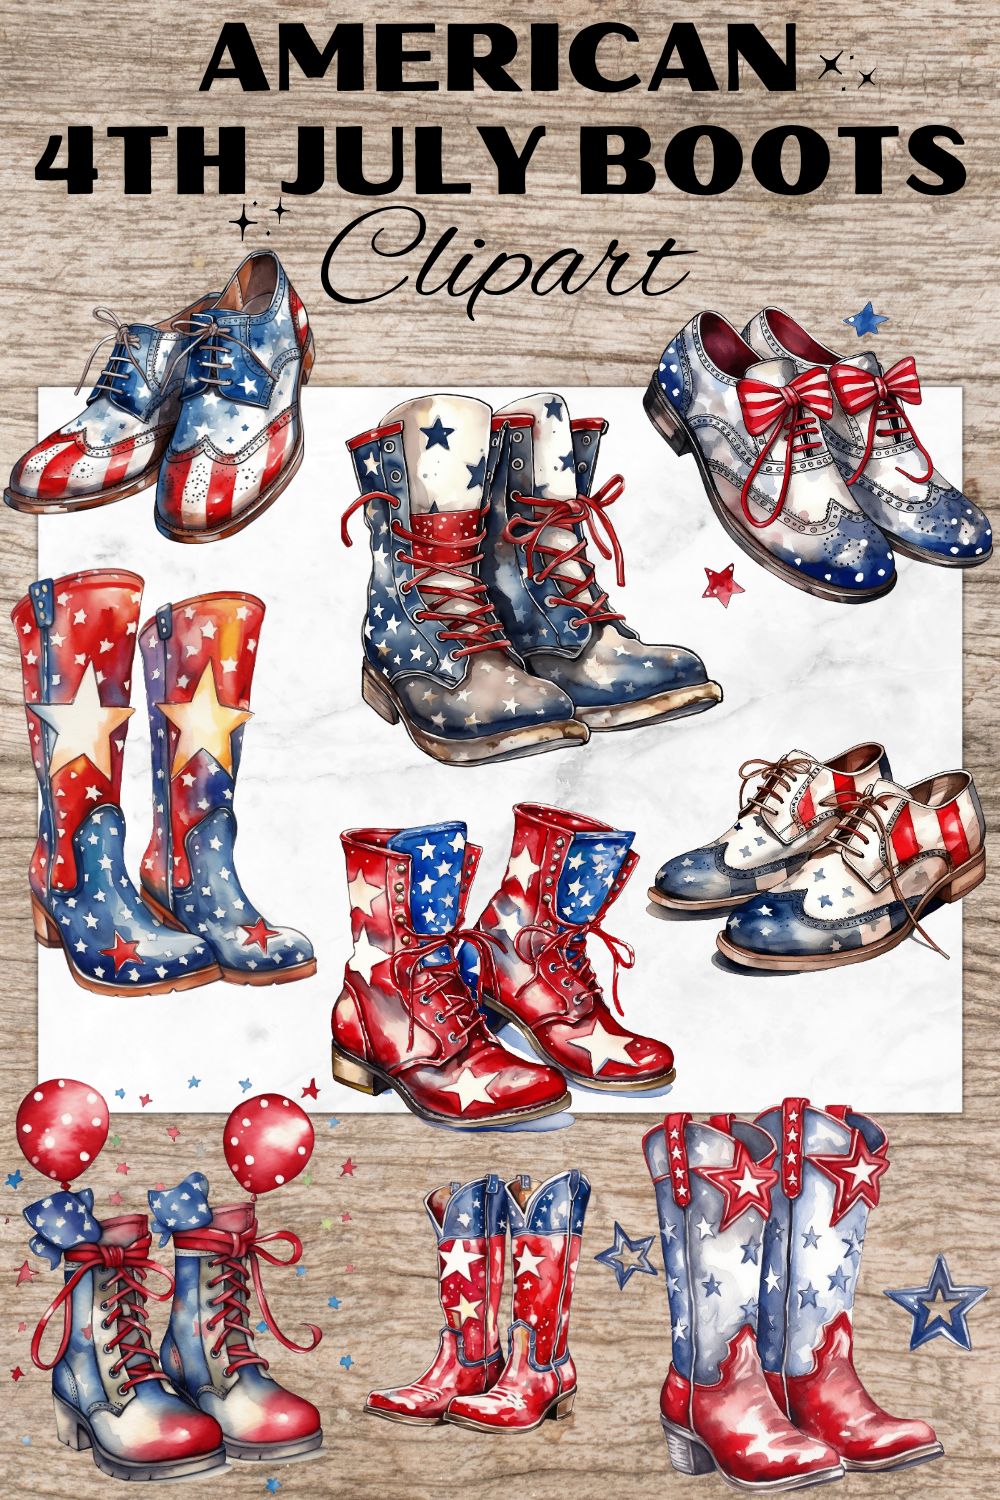 12 American Boots PNG, Watercolor Clipart, 4th of July, American Shoes, Transparent PNG, Digital Paper Craft, Illustrations, Watercolor Clipart For Scrapbook, Invitation, Wall Art, T-Shirt Design pinterest preview image.